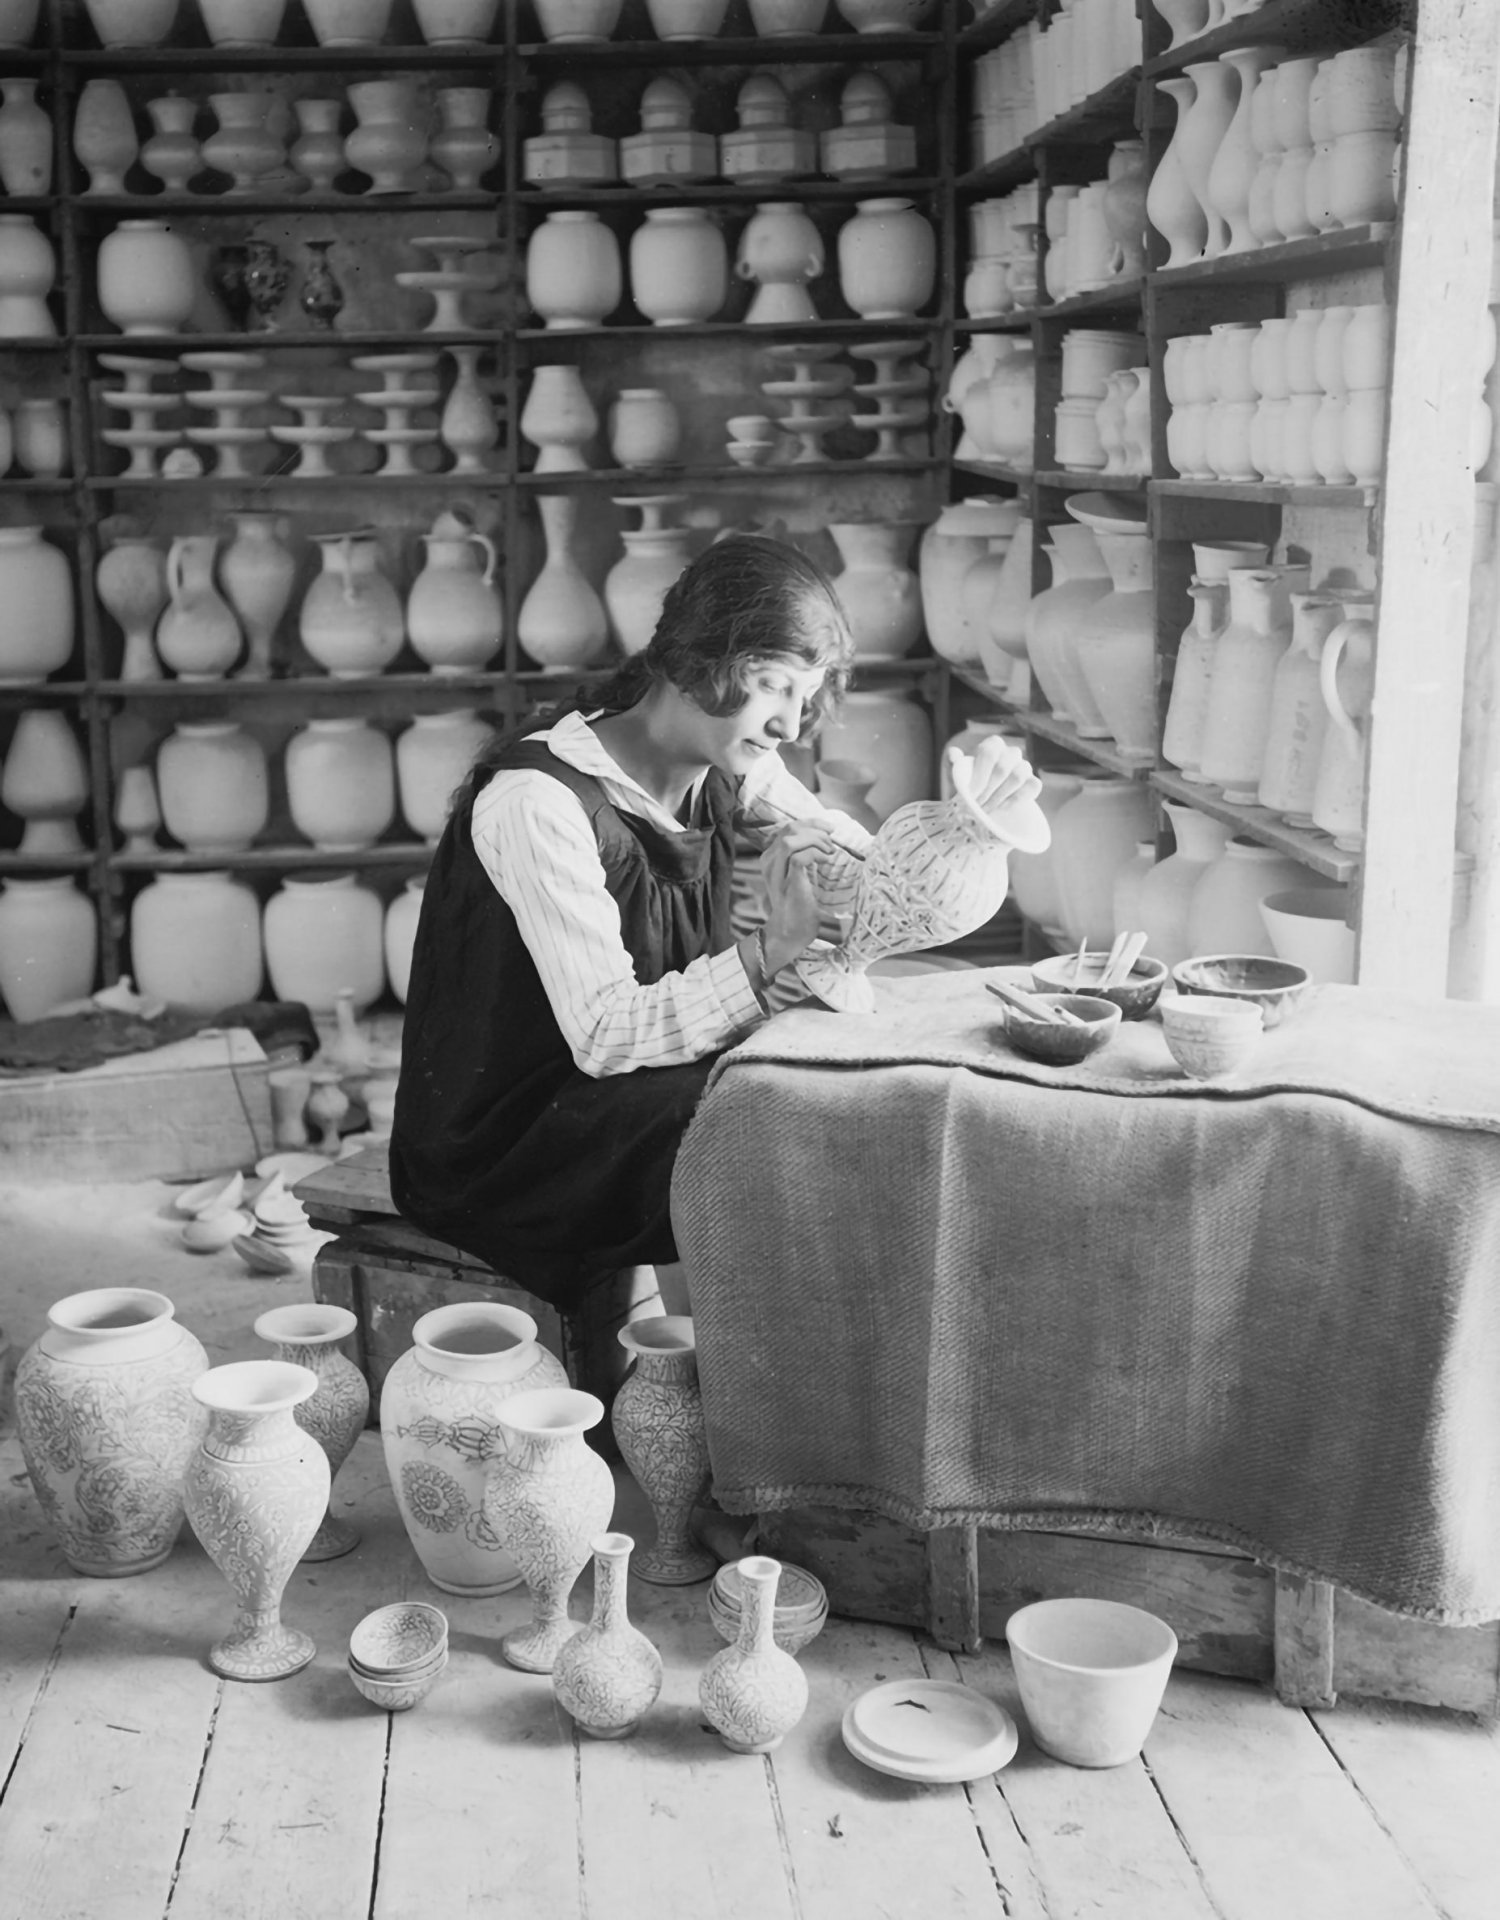 A woman painting a pottery vase at the Dome of the Rock Tiles workshop, Via Dolorosa, Jerusalem, 1920s